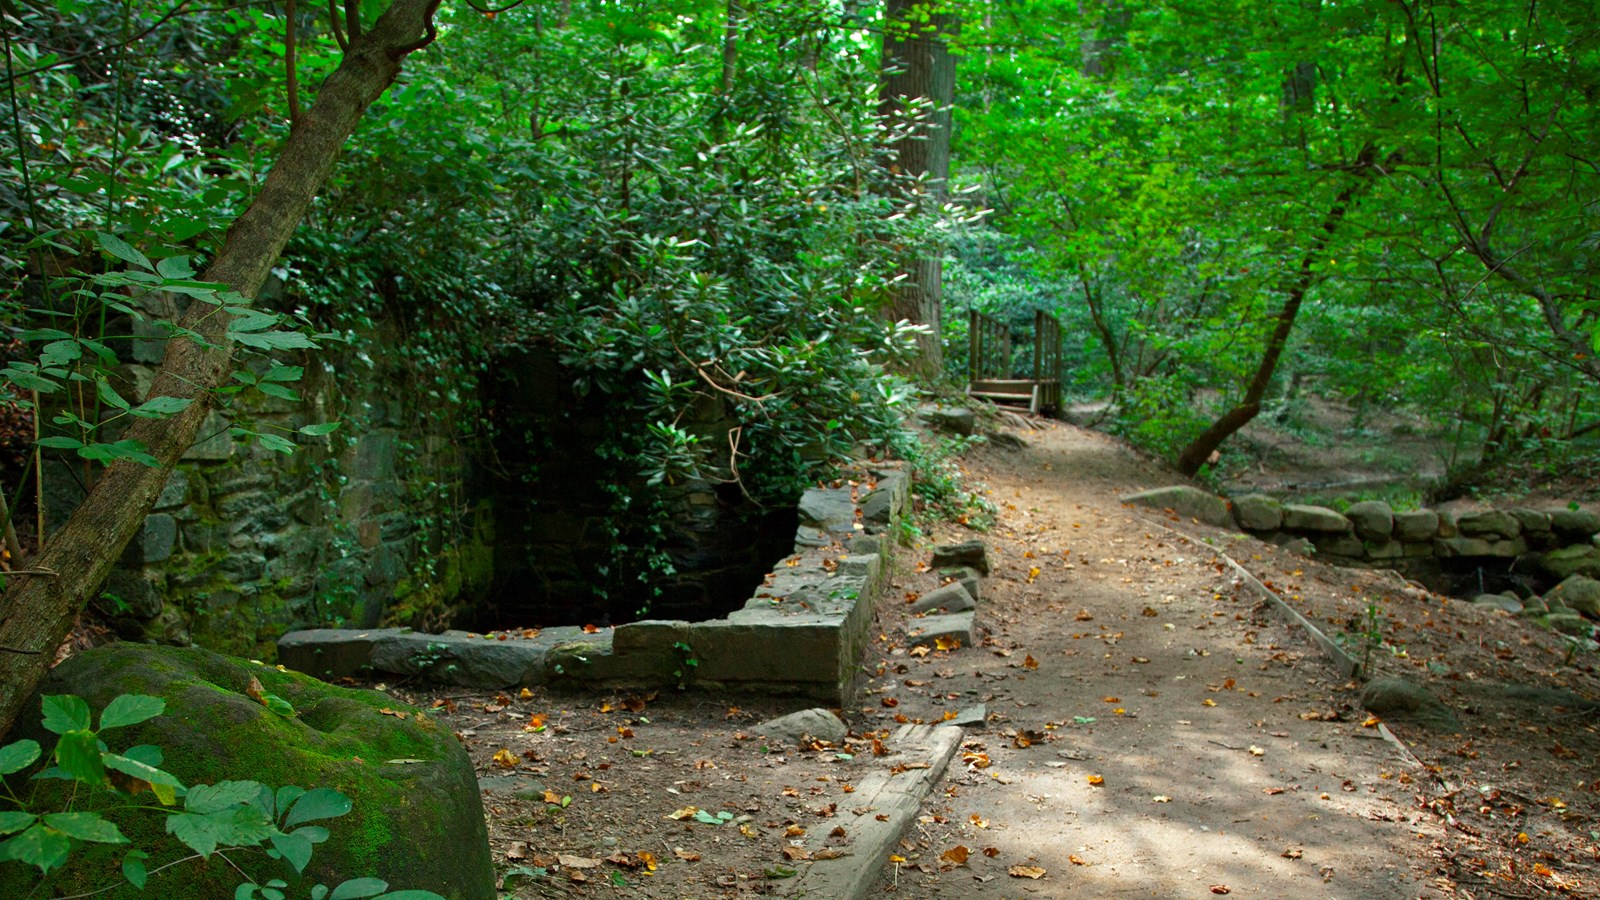 A stone lined dirt path disappears into lush green undergrowth